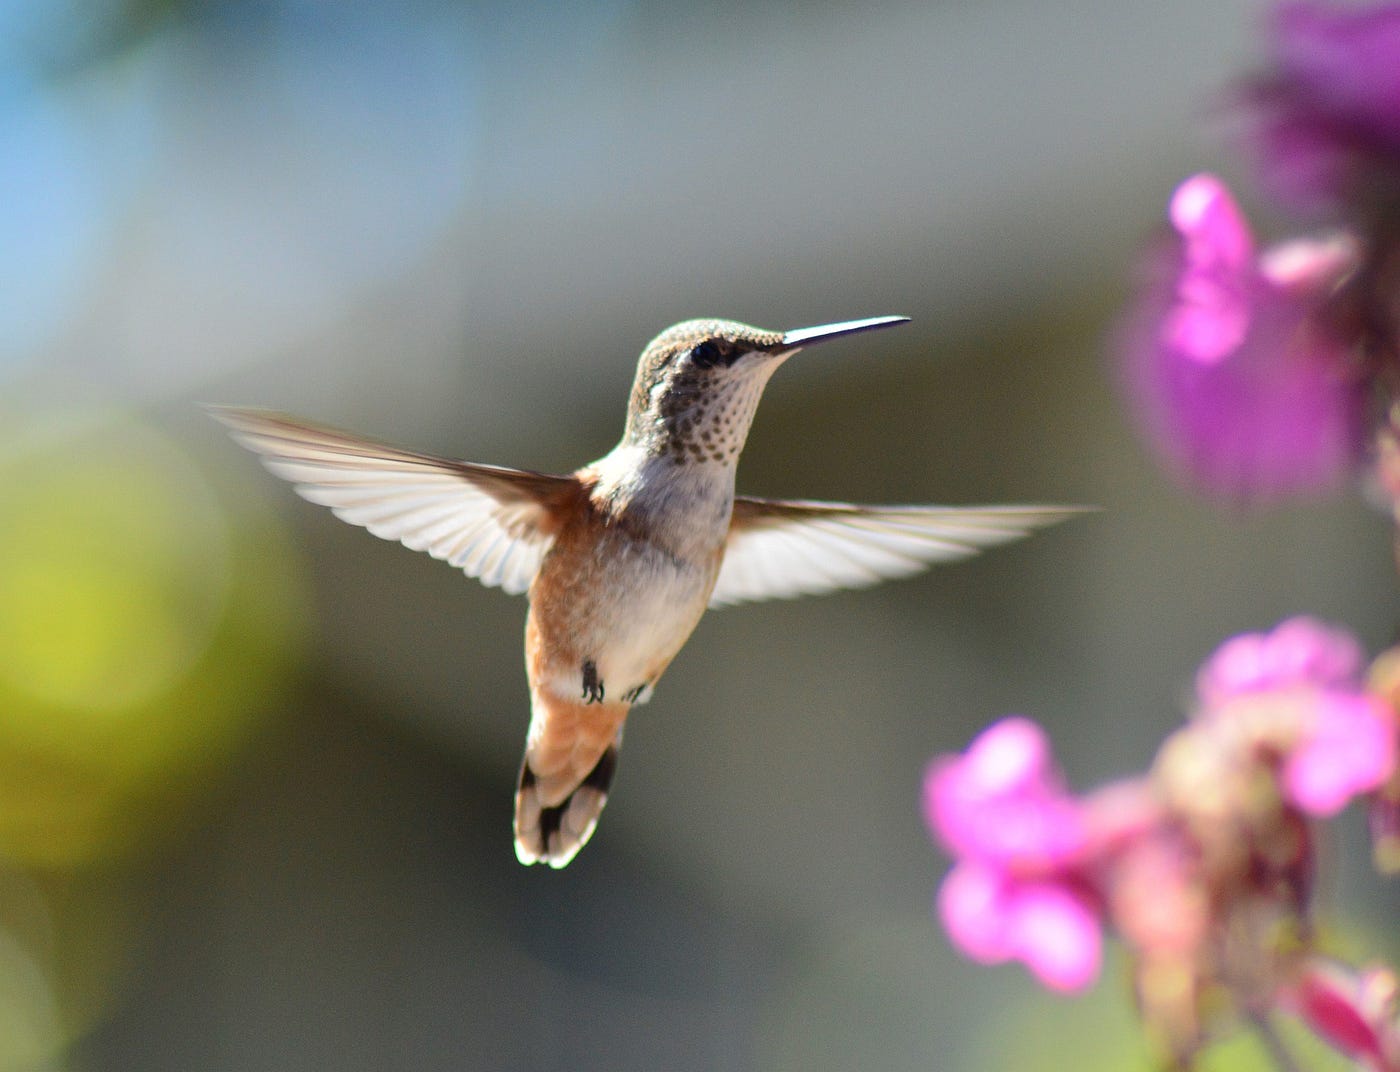 A tiny hummingbird hovers beside a trumpet flower